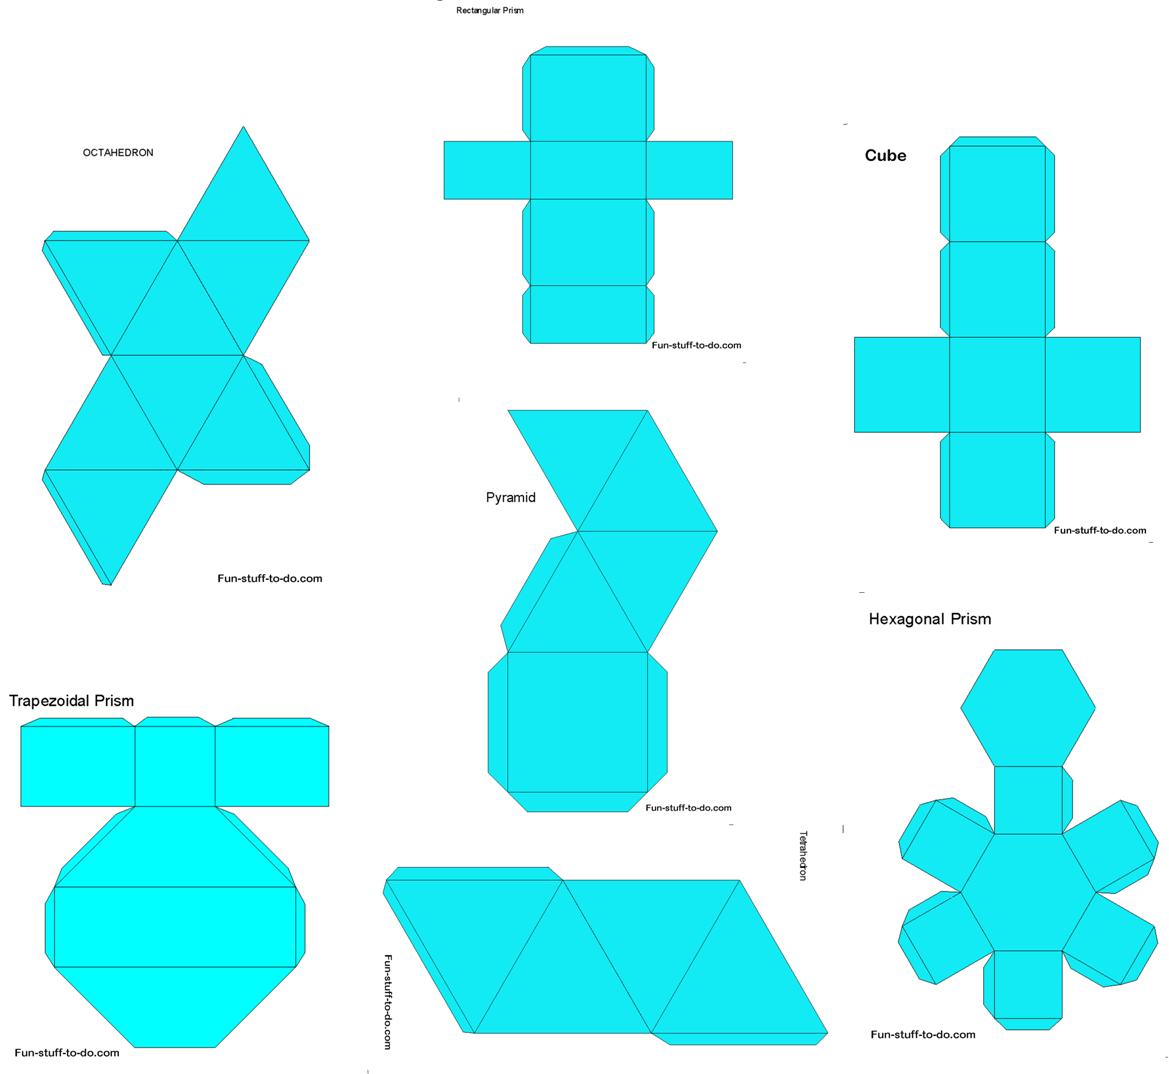 19 Free geometric shapes worksheets to print, cut, color, outline, name, learn to draw and identify. Basic 2 dimensional shapes, polygons and solid 3 dimensional shapes in easy to understand format.